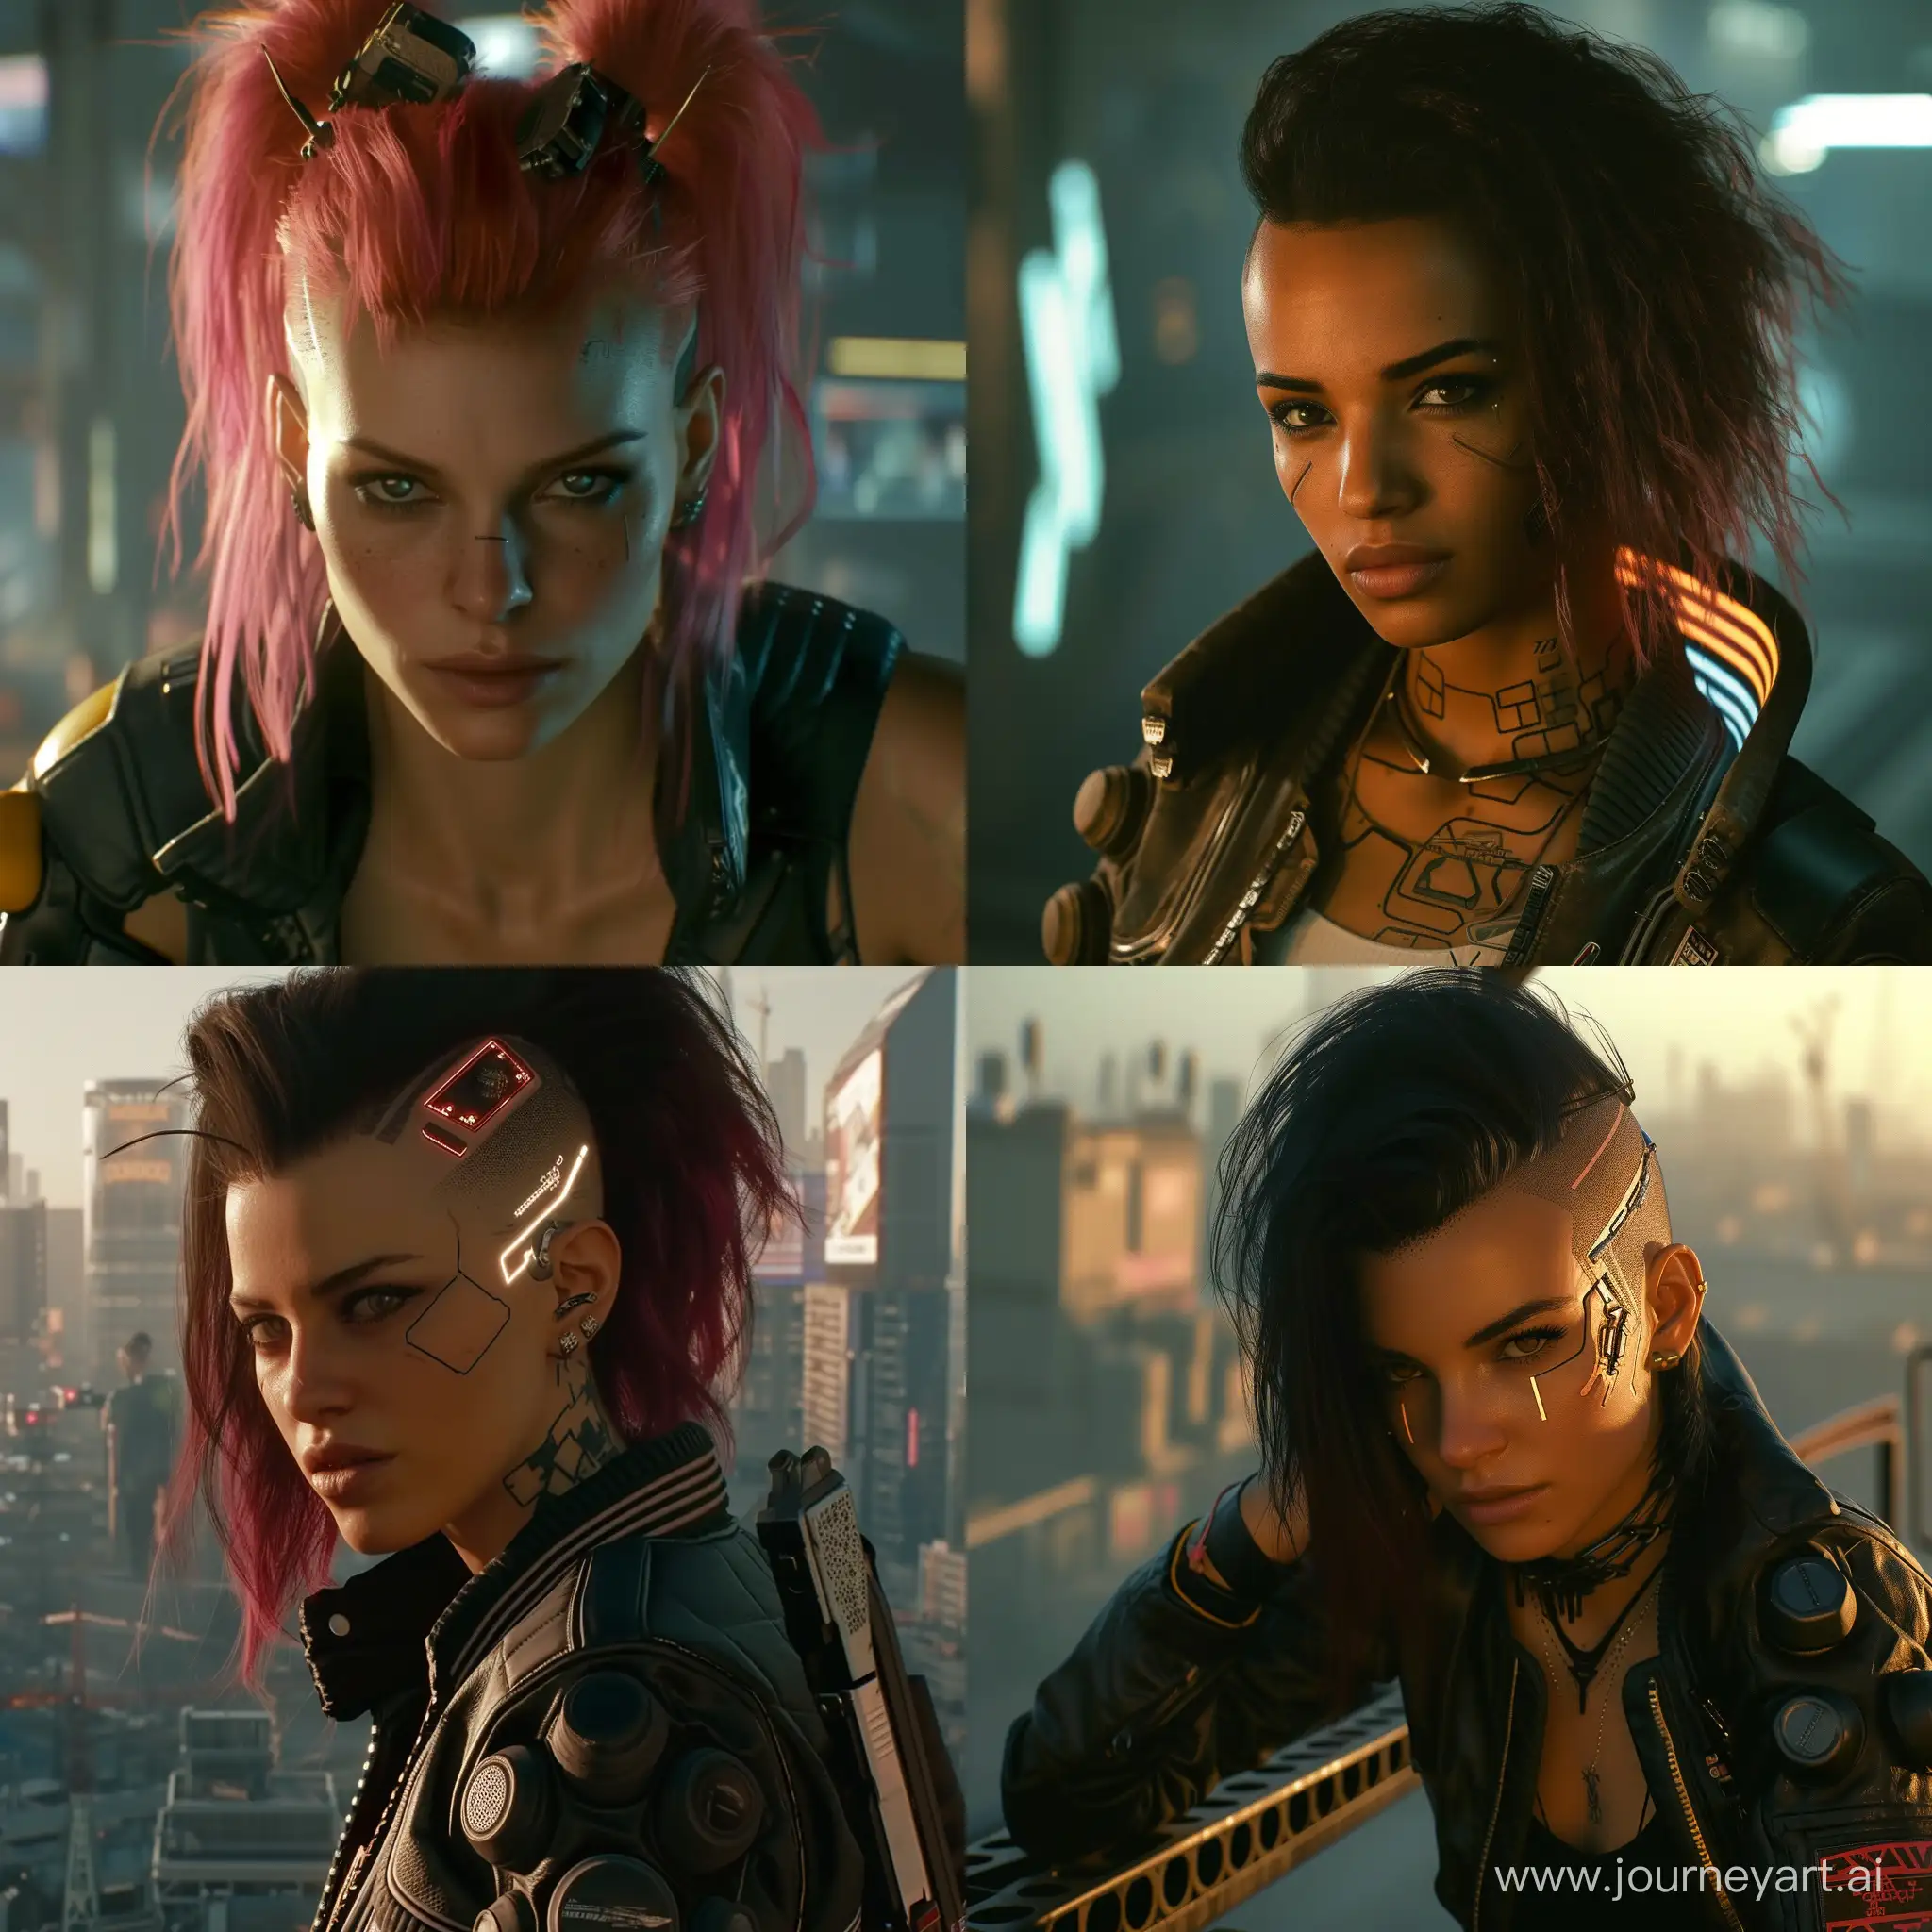 La Roux in Cyberpunk 2077 in the morning, emphasize her hairstyle